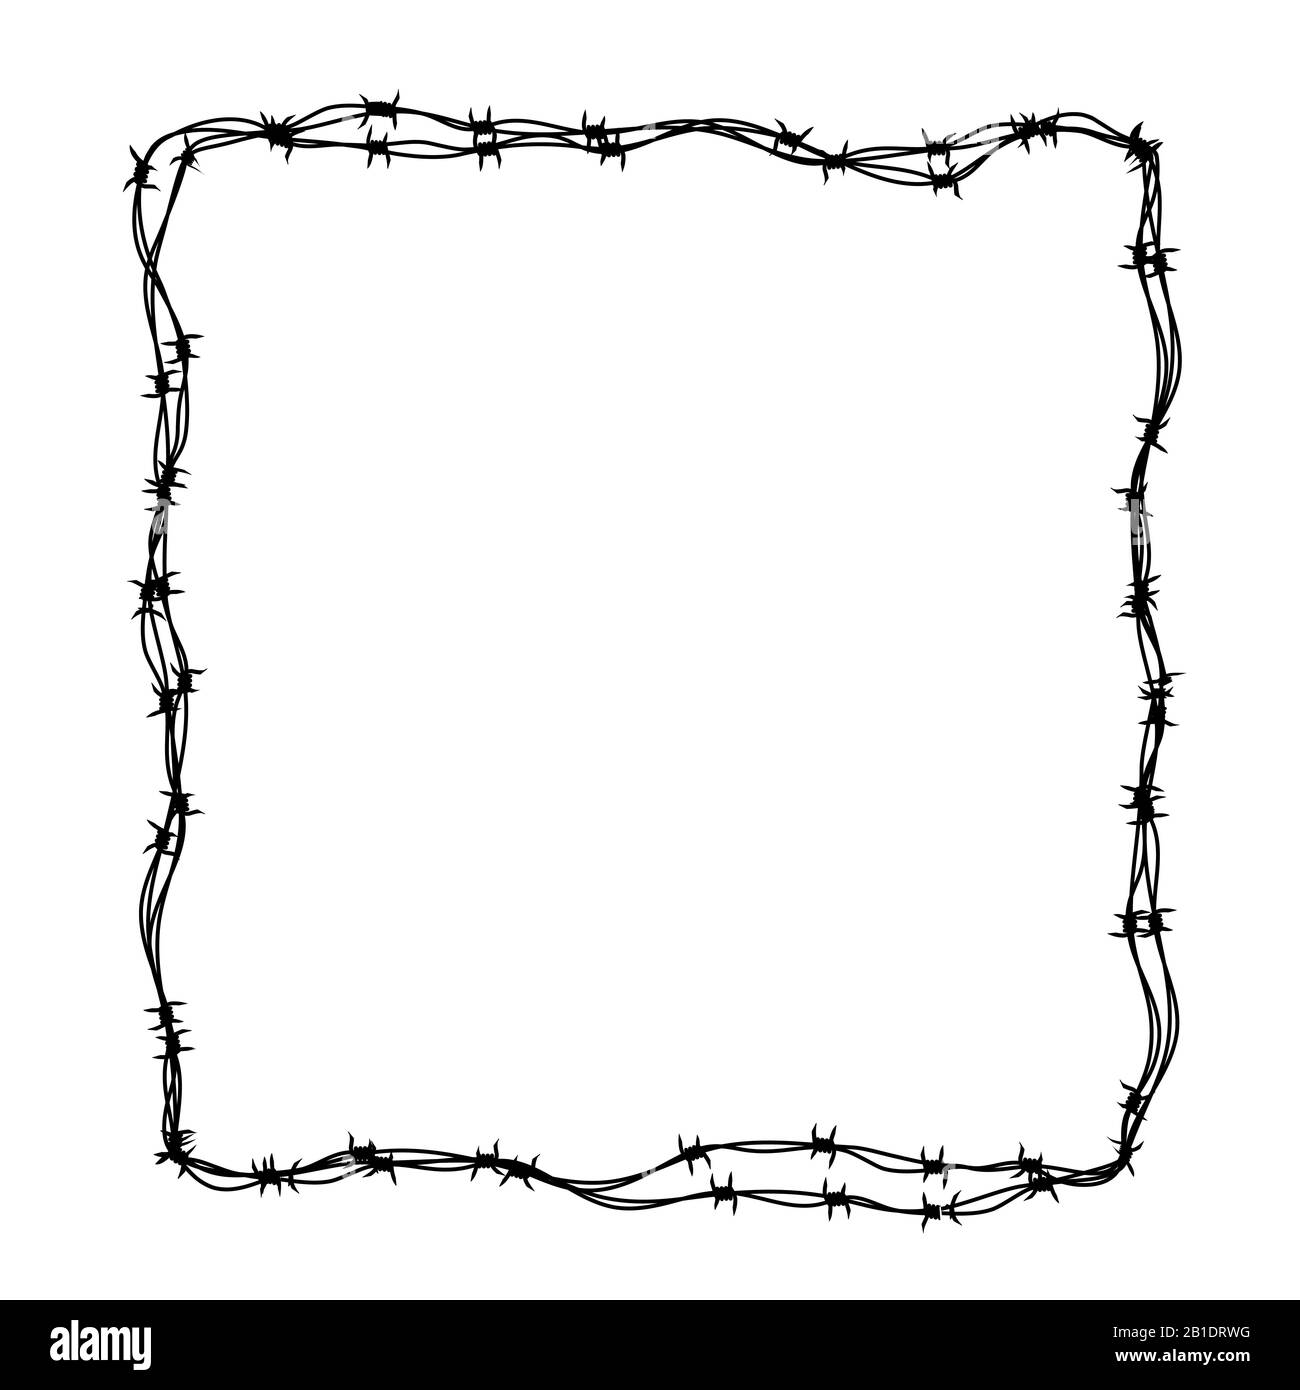 Barbed wire frame in square shape on white Stock Vector